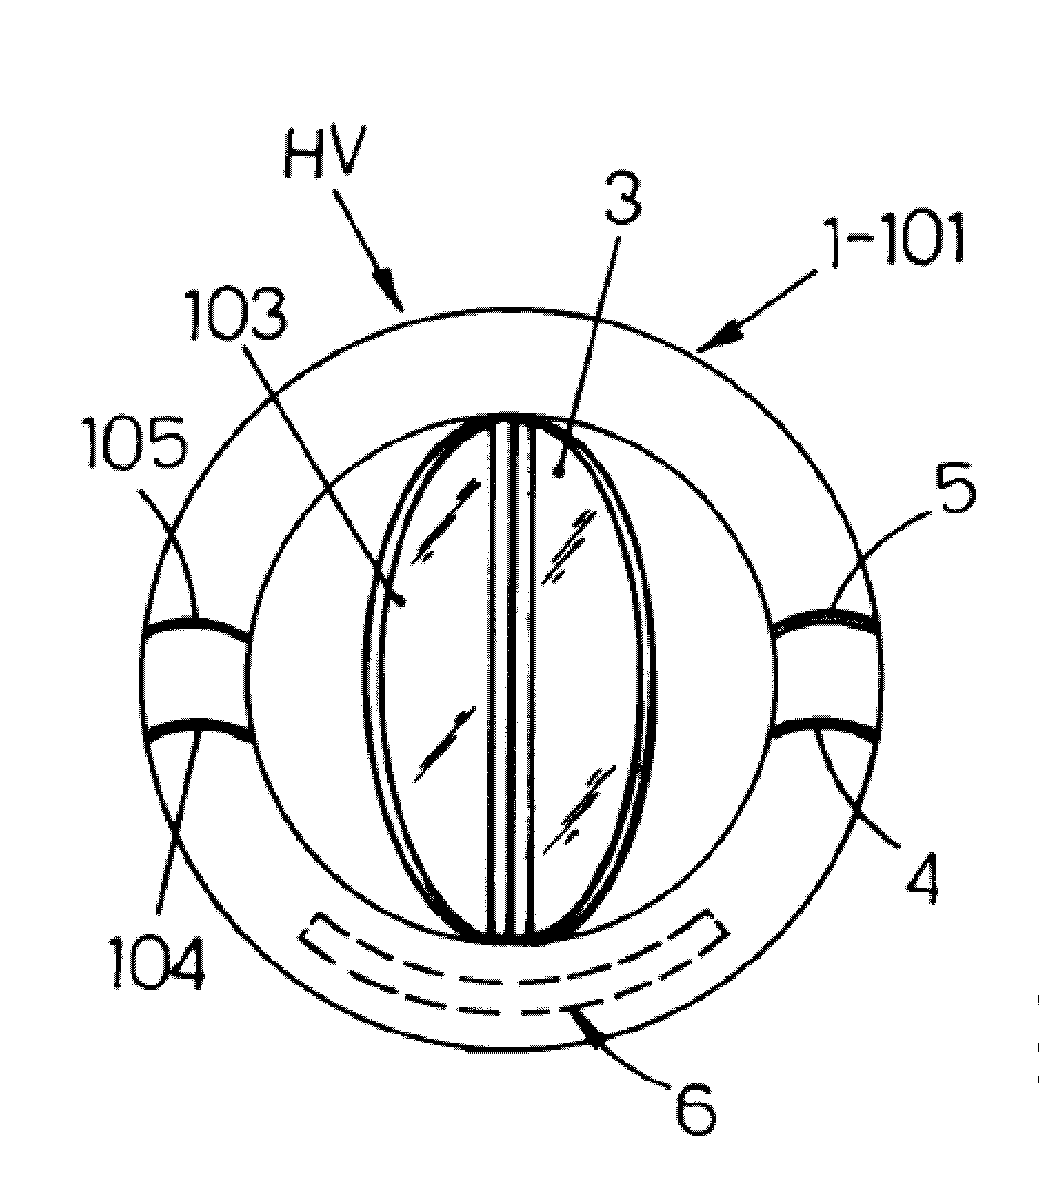 Heart valve prosthesis with integrated electronic circuit for measuring intravalvular electrical impedance, and system for monitoring functionality of the prosthesis